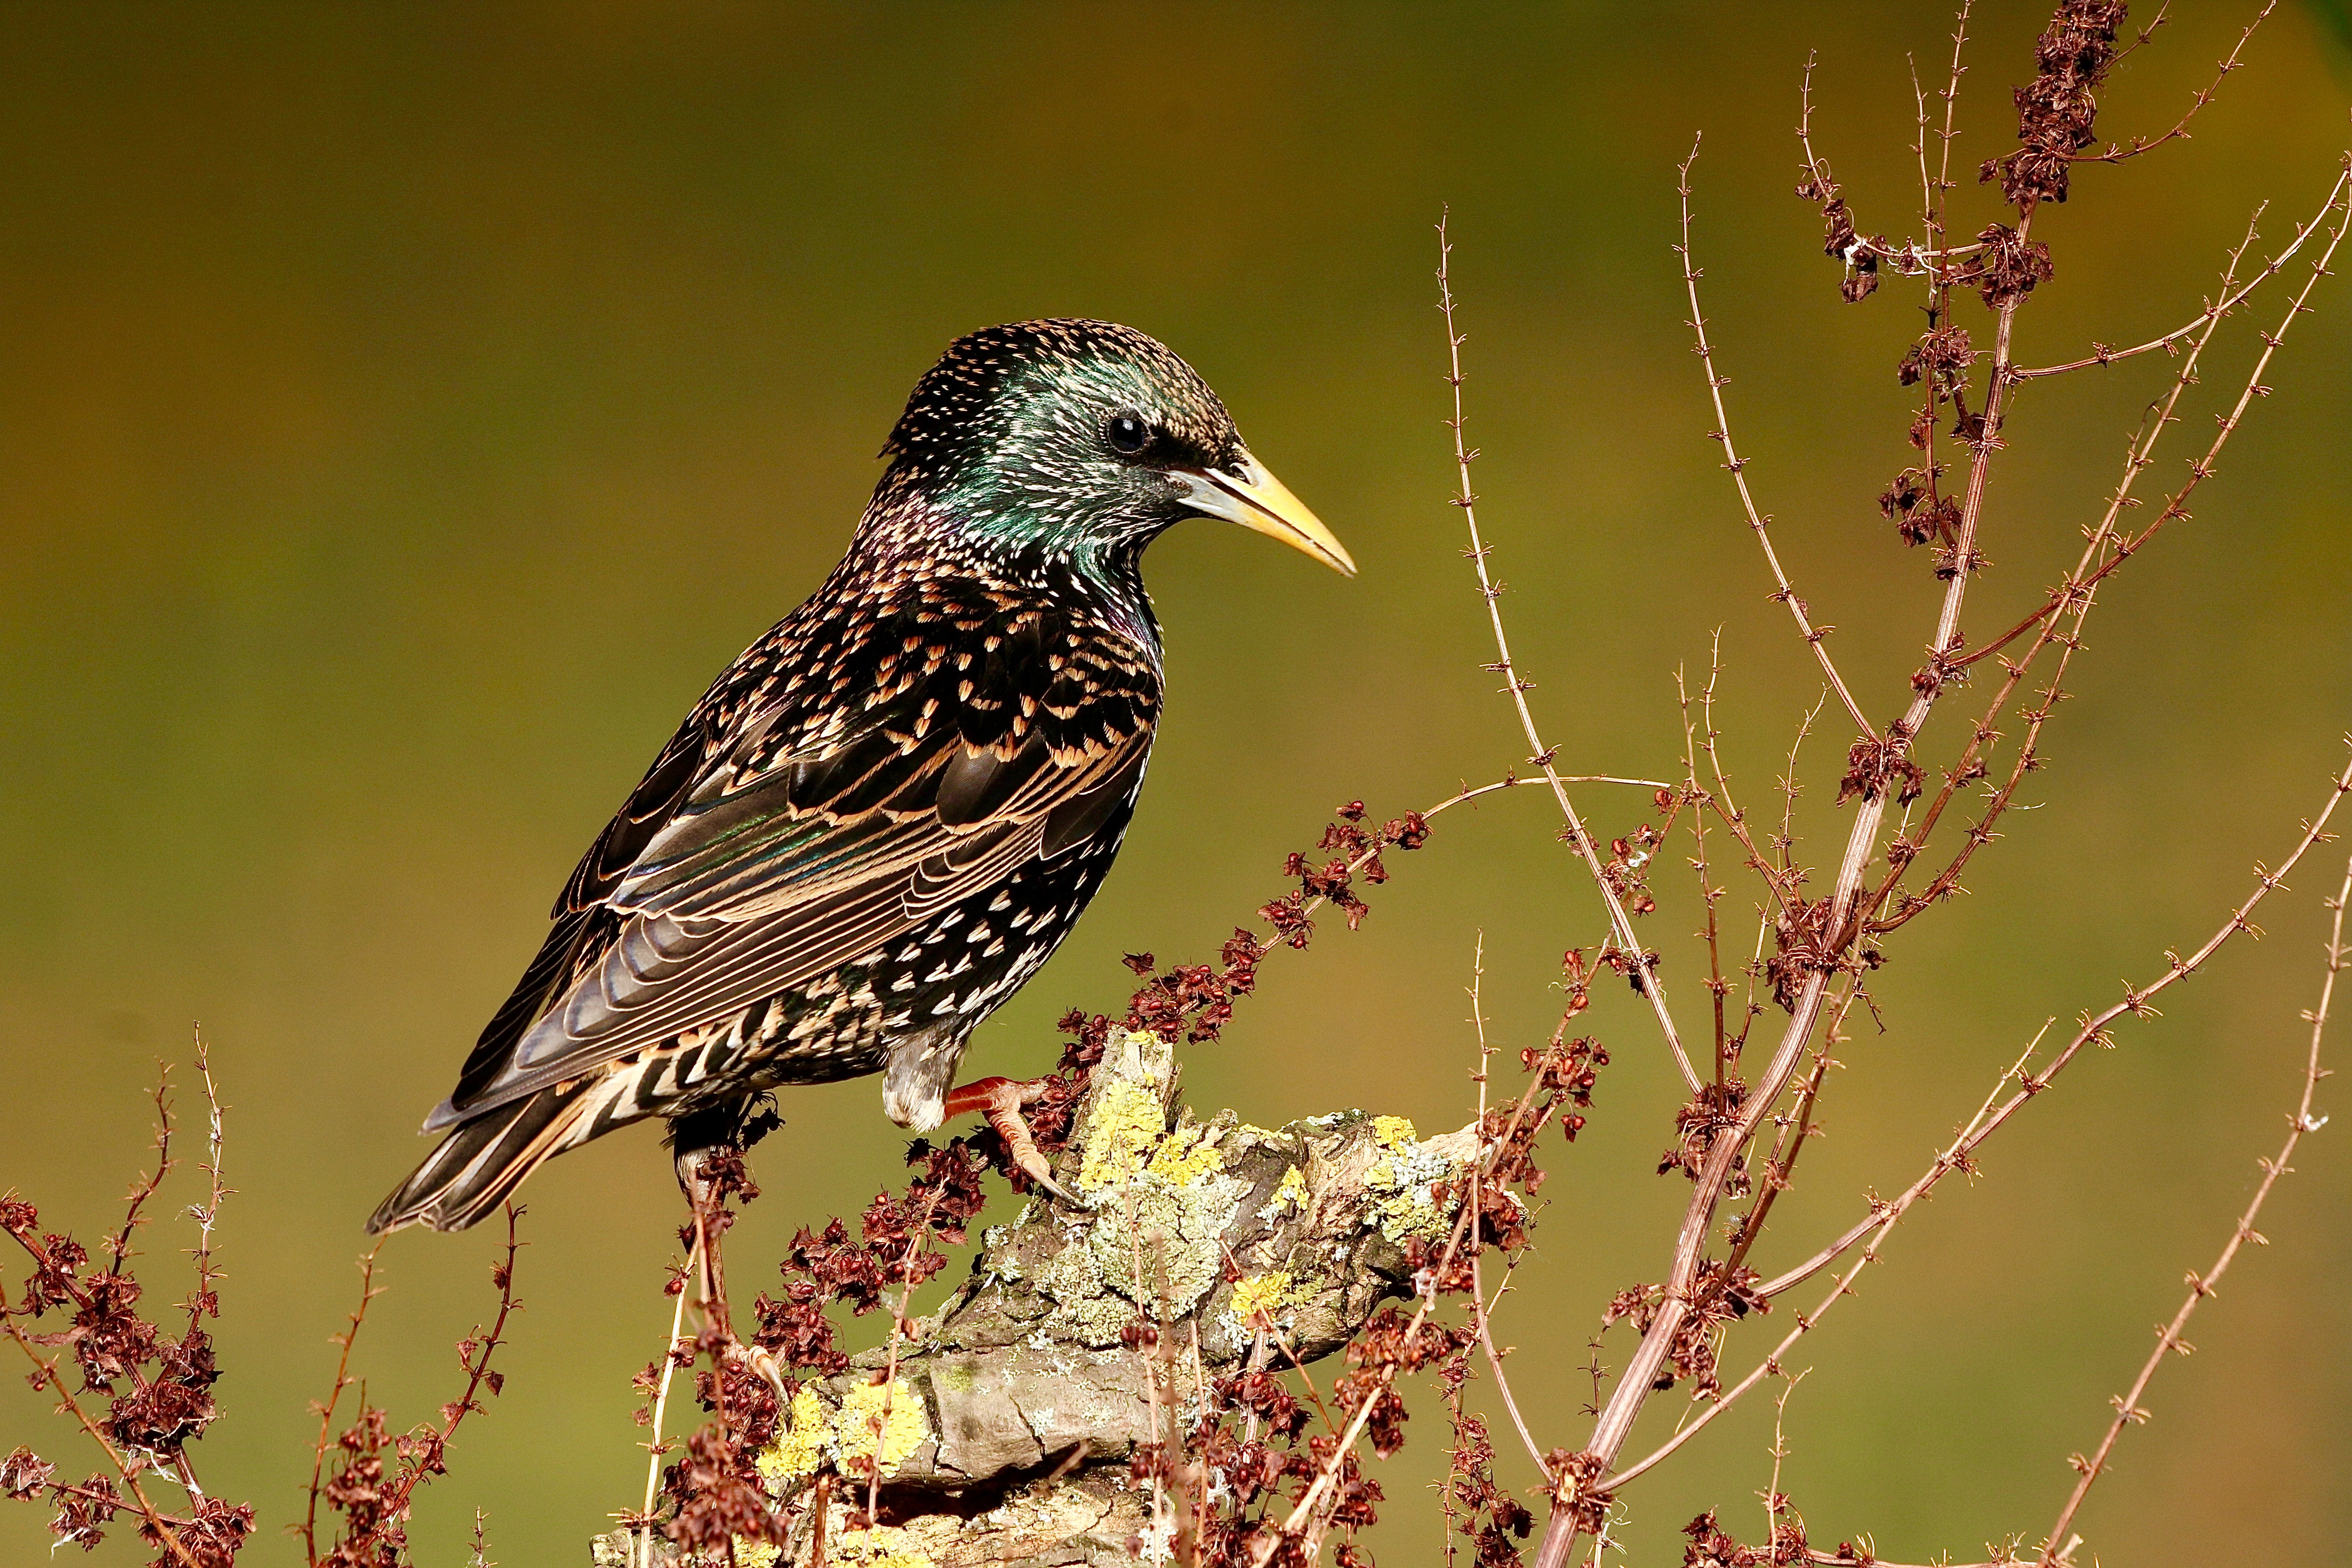 A darling of a Starling.